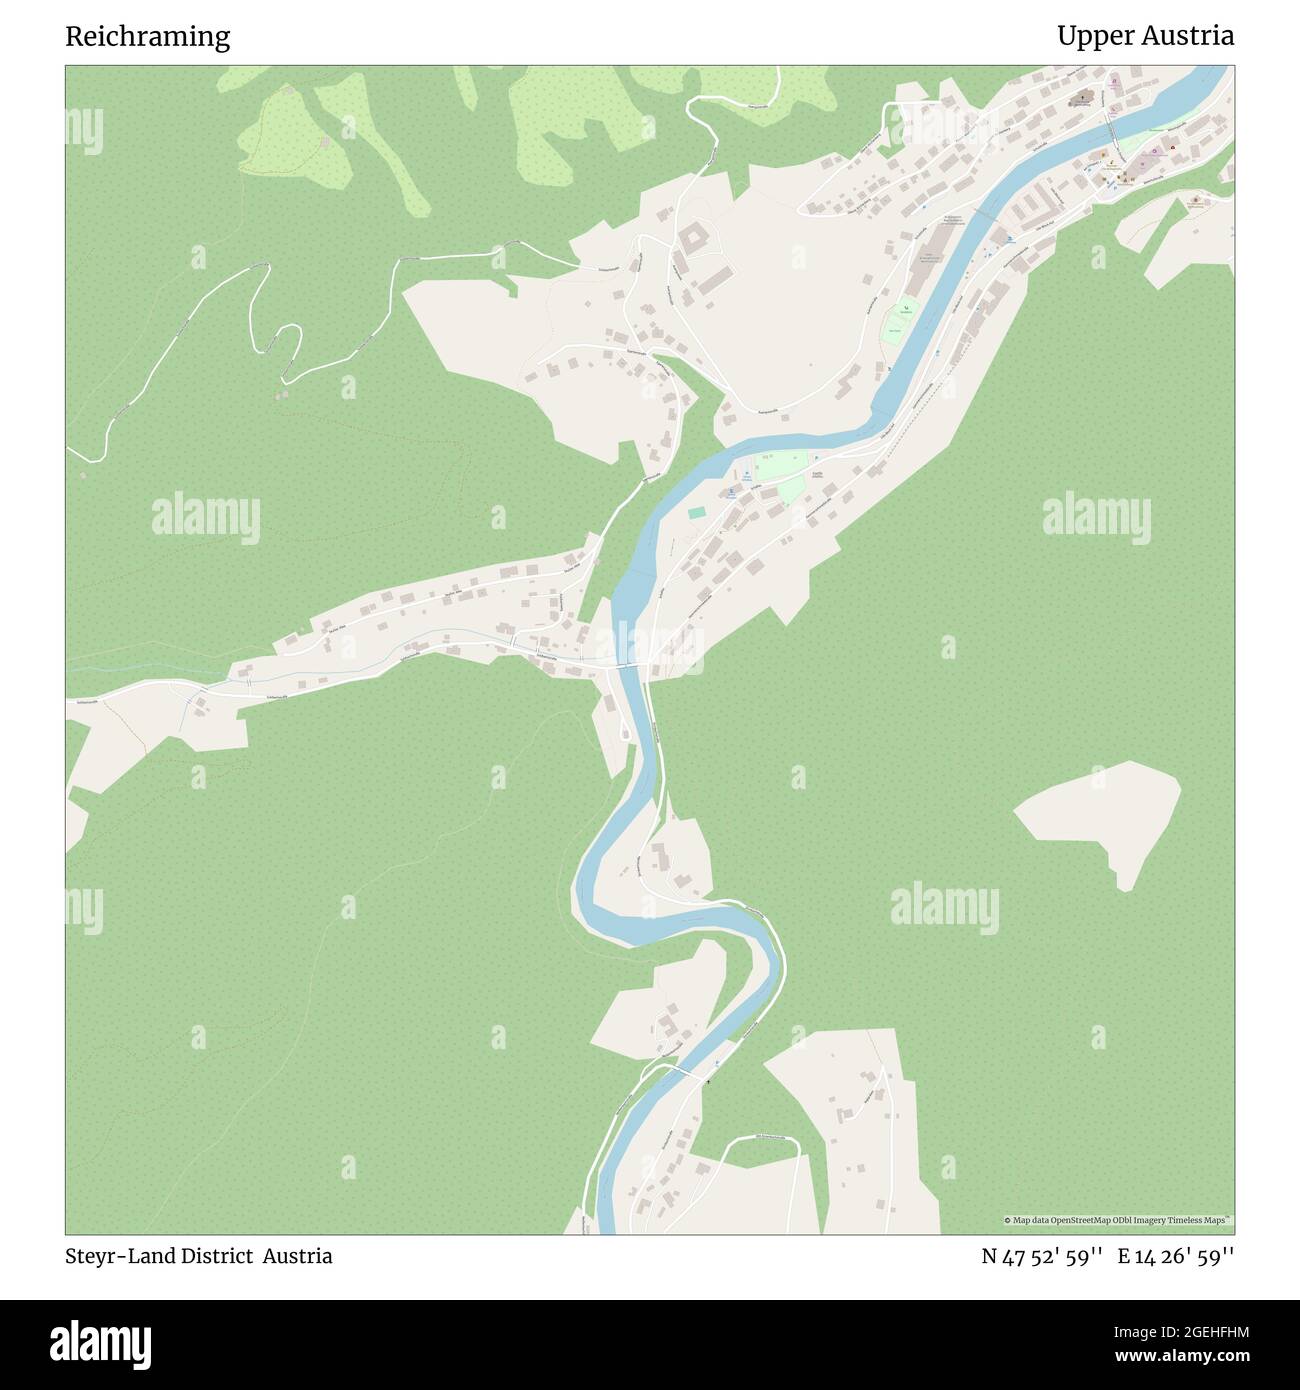 Reichraming, Steyr-Land District, Austria, Upper Austria, N 47 52' 59'', E 14 26' 59'', map, Timeless Map published in 2021. Travelers, explorers and adventurers like Florence Nightingale, David Livingstone, Ernest Shackleton, Lewis and Clark and Sherlock Holmes relied on maps to plan travels to the world's most remote corners, Timeless Maps is mapping most locations on the globe, showing the achievement of great dreams Stock Photo